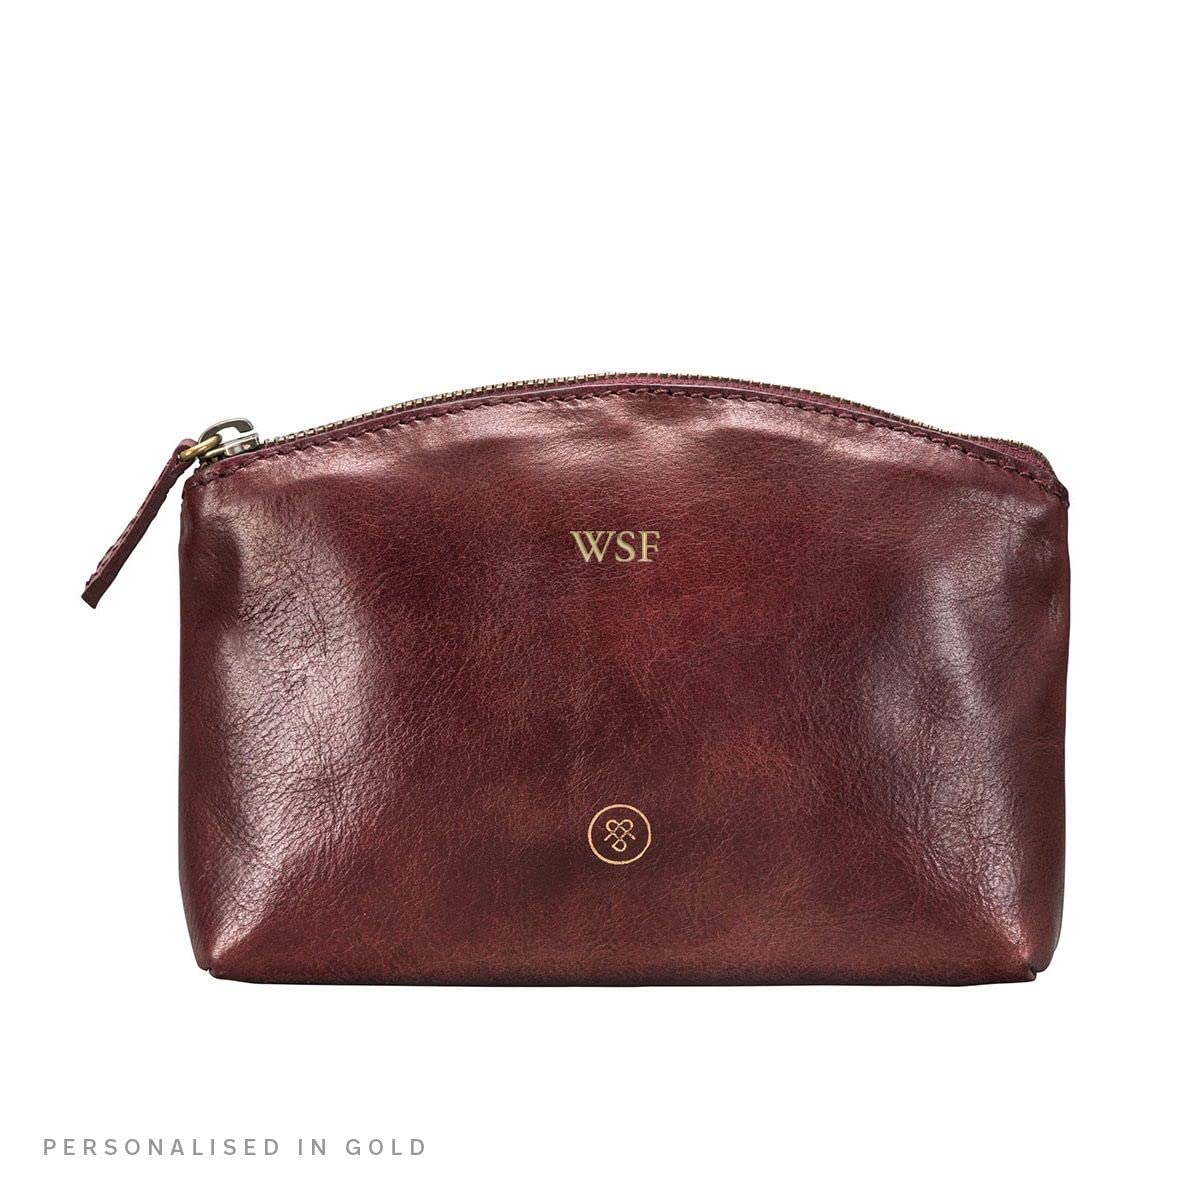 Maxwell Scott | Womens Luxury Leather Small Makeup Bag | The Chia | Handmade In Italy | Wine Red